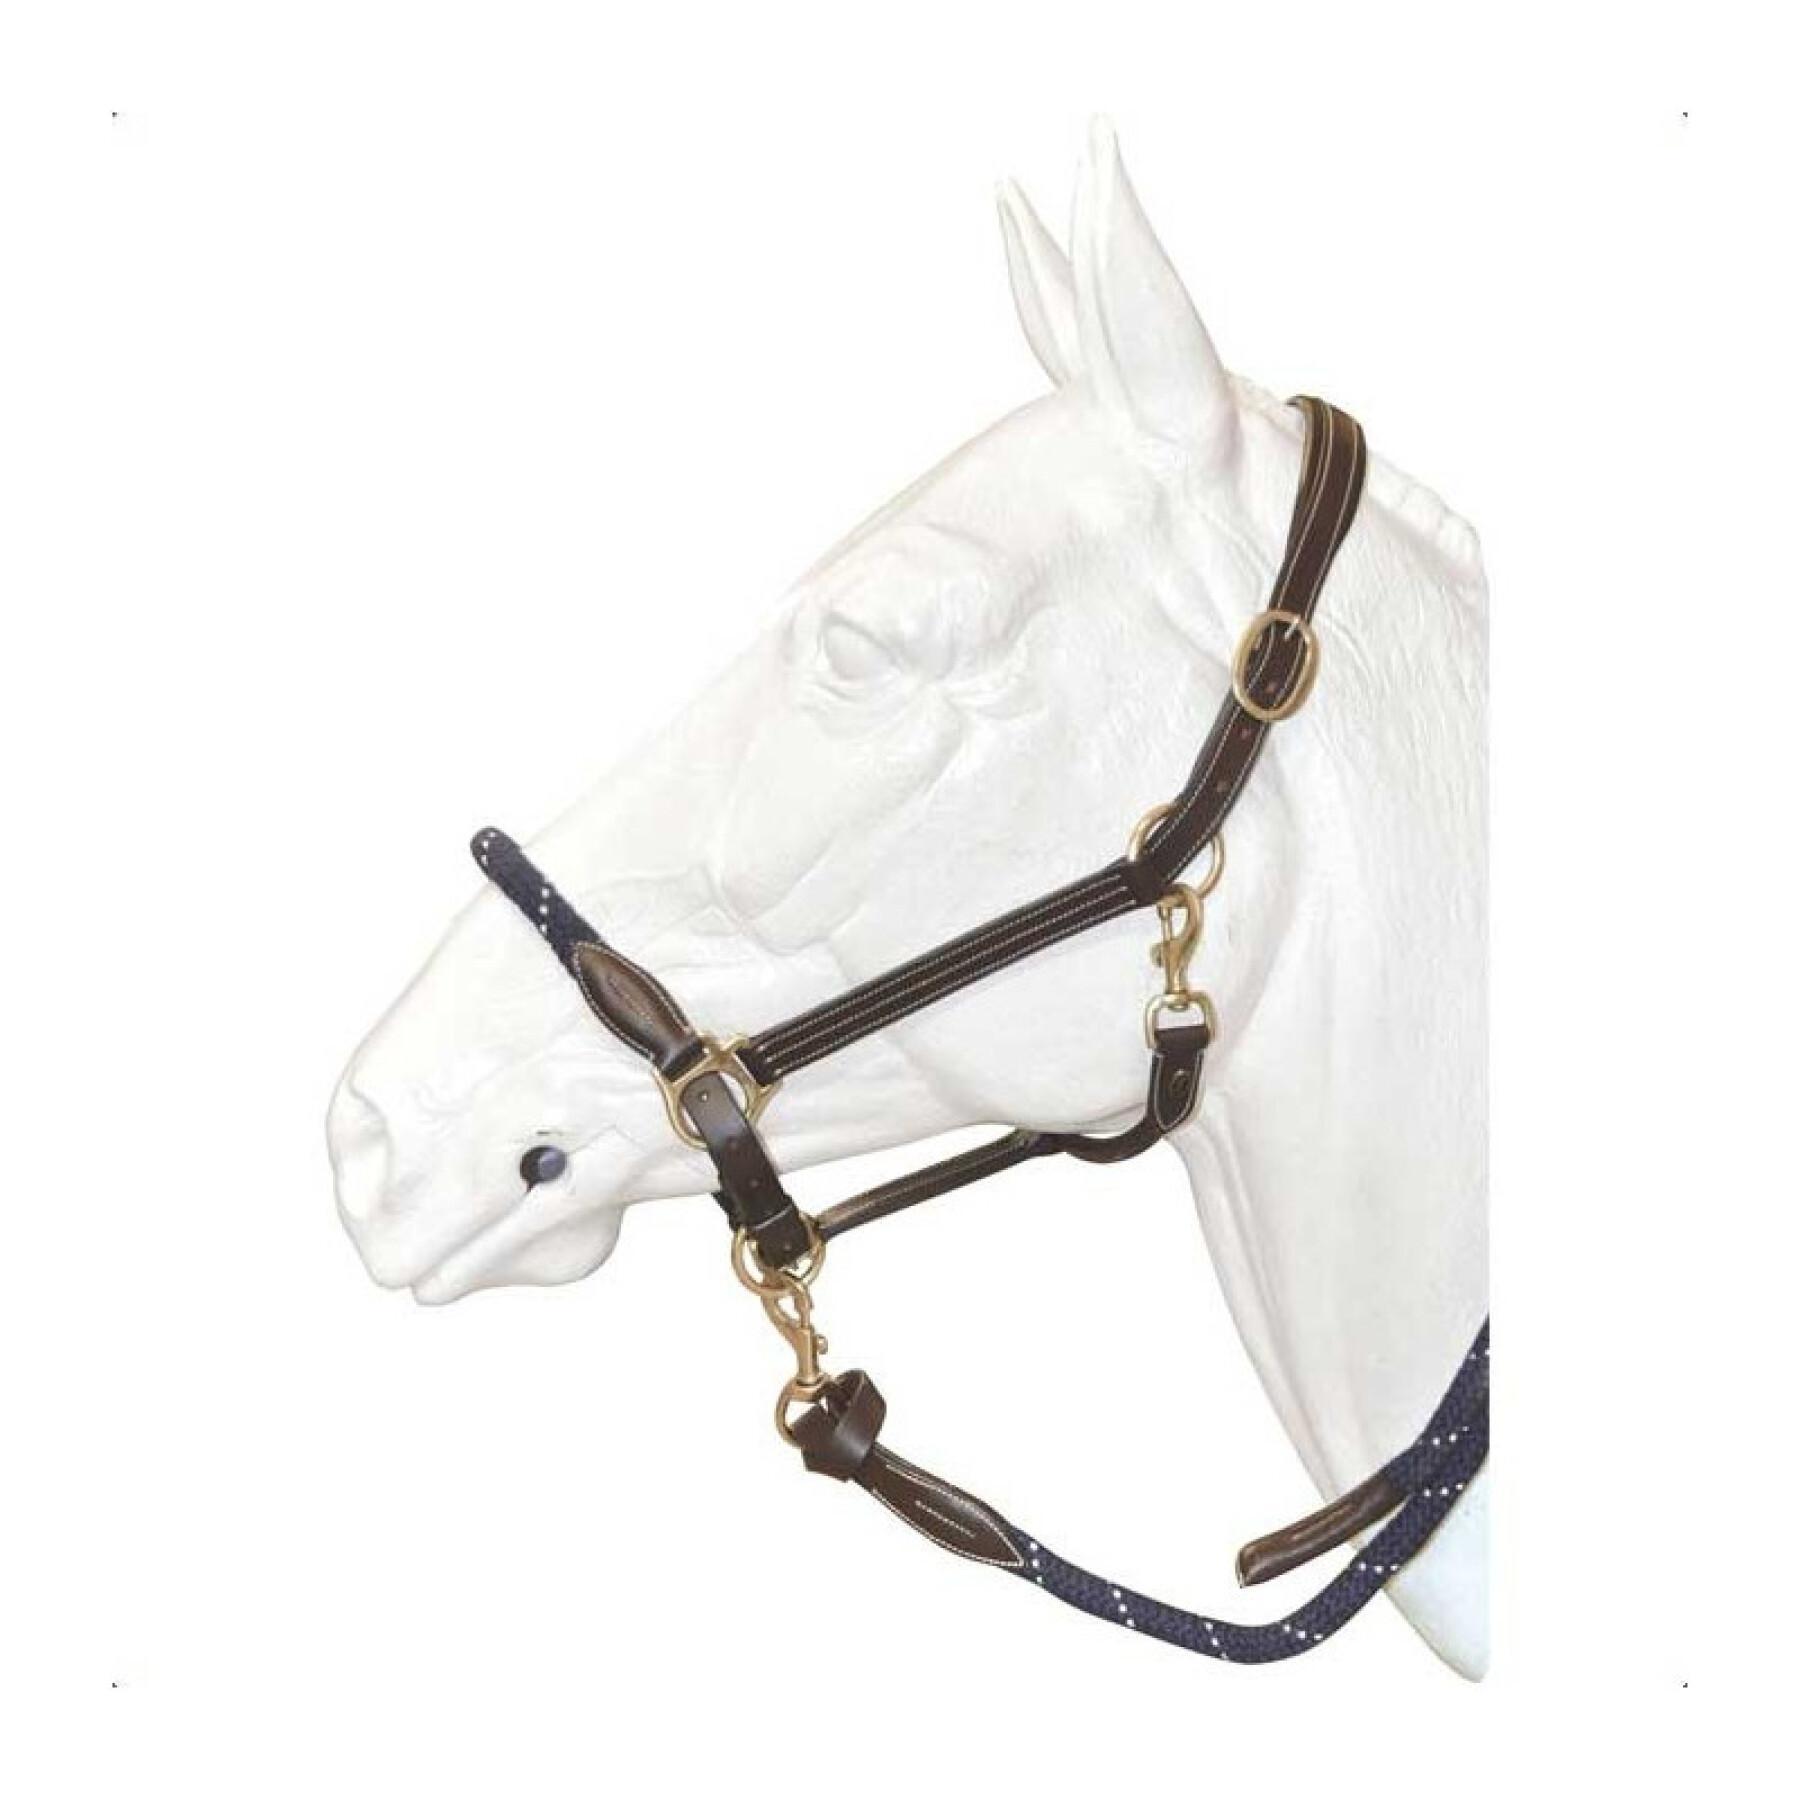 Leather halter for horse with reins Canter